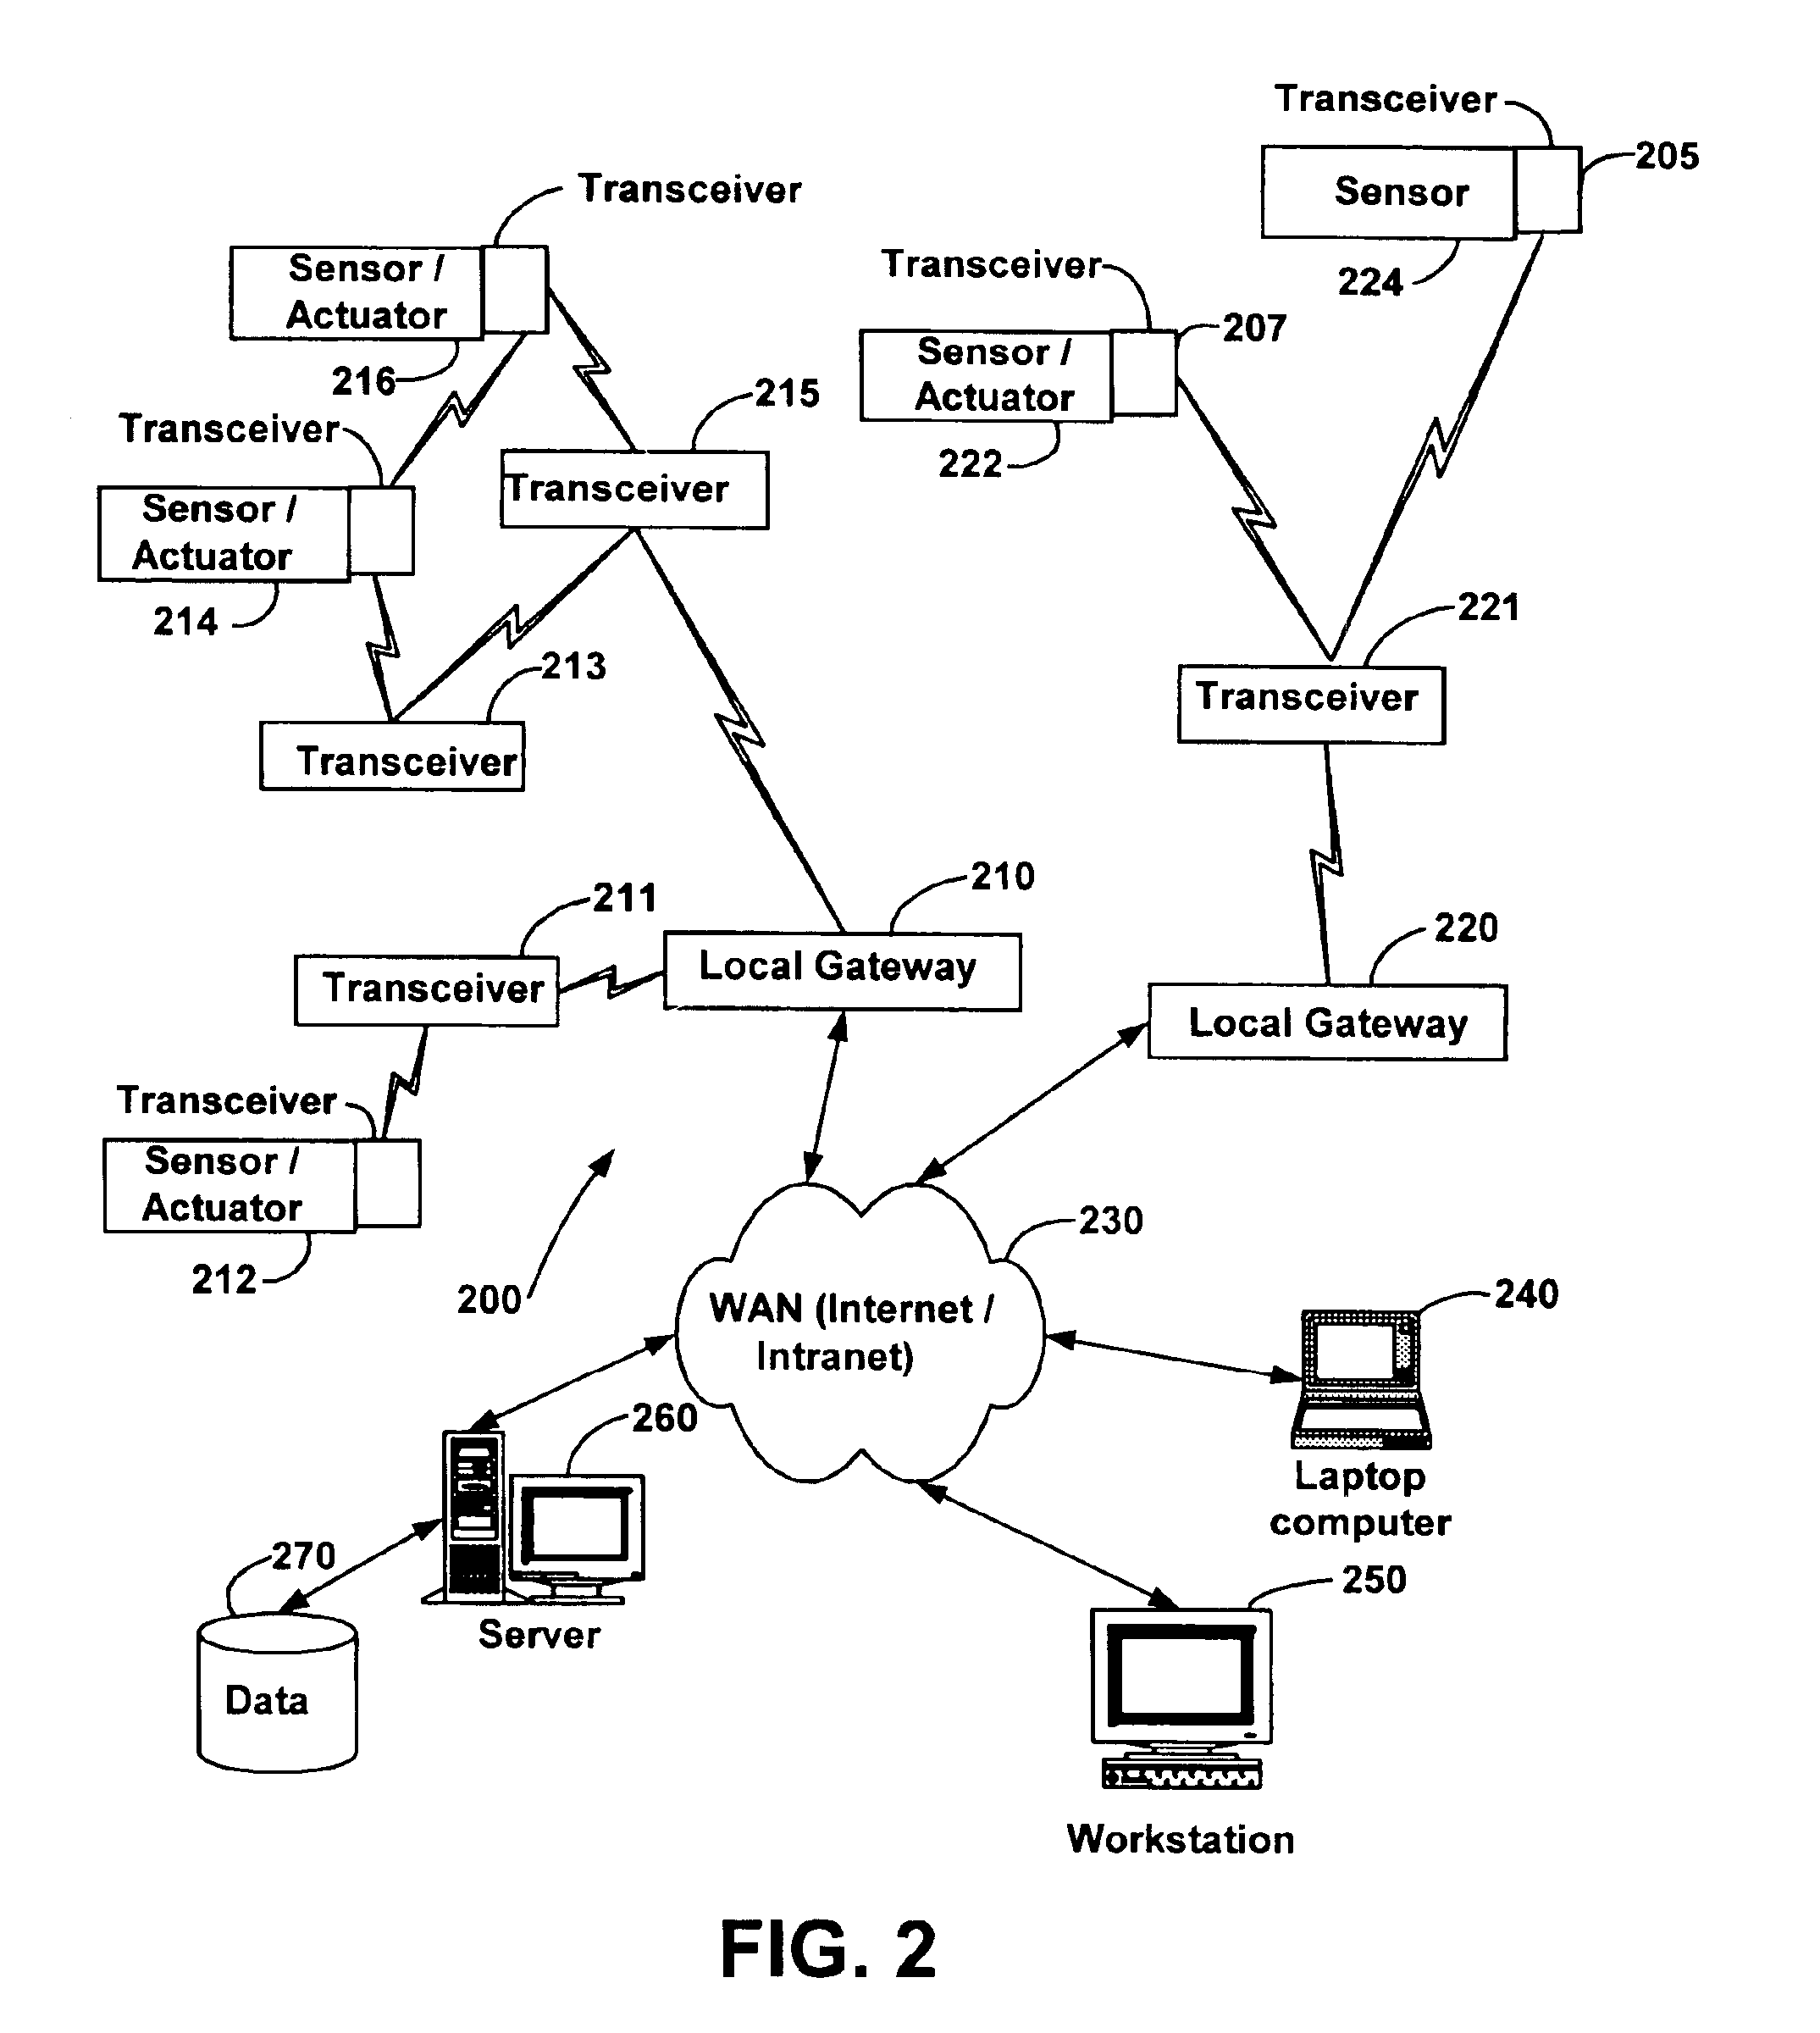 System and method for monitoring and controlling remote devices